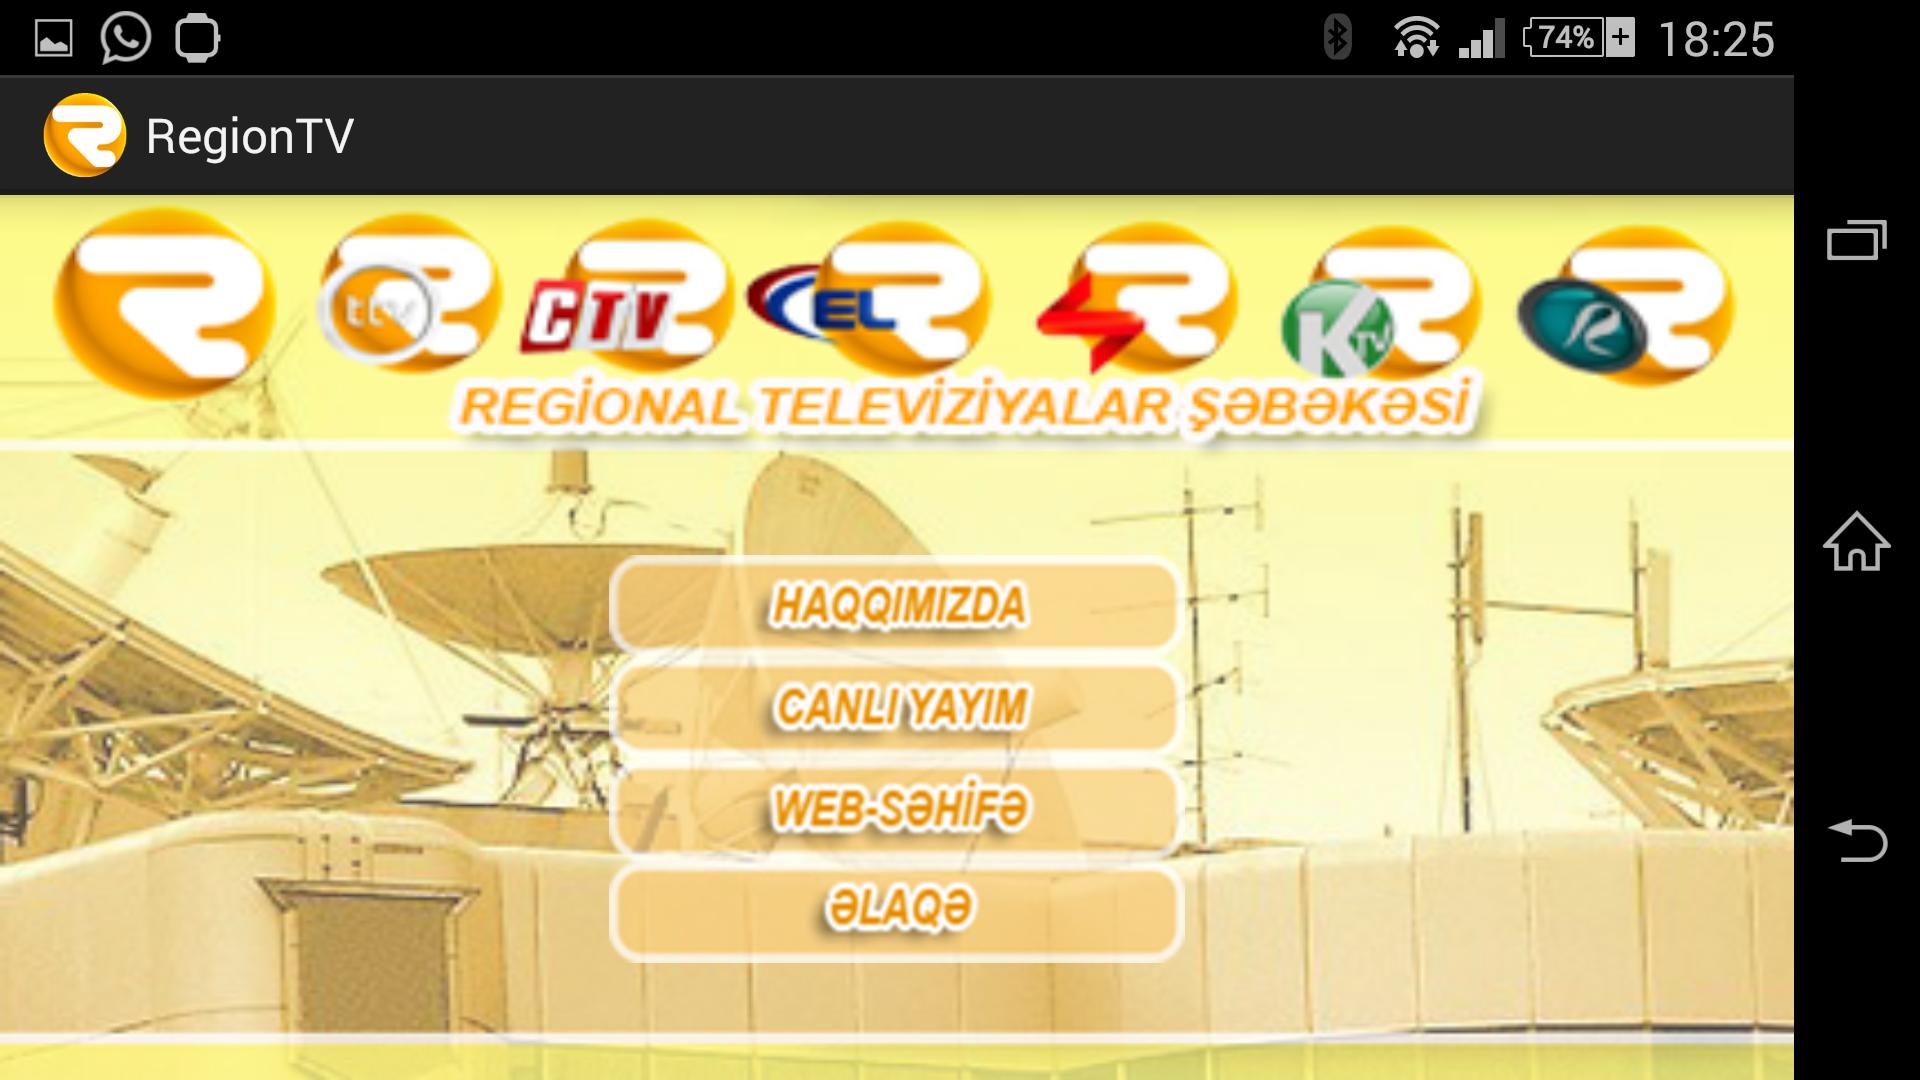 Region TV for Android - APK Download